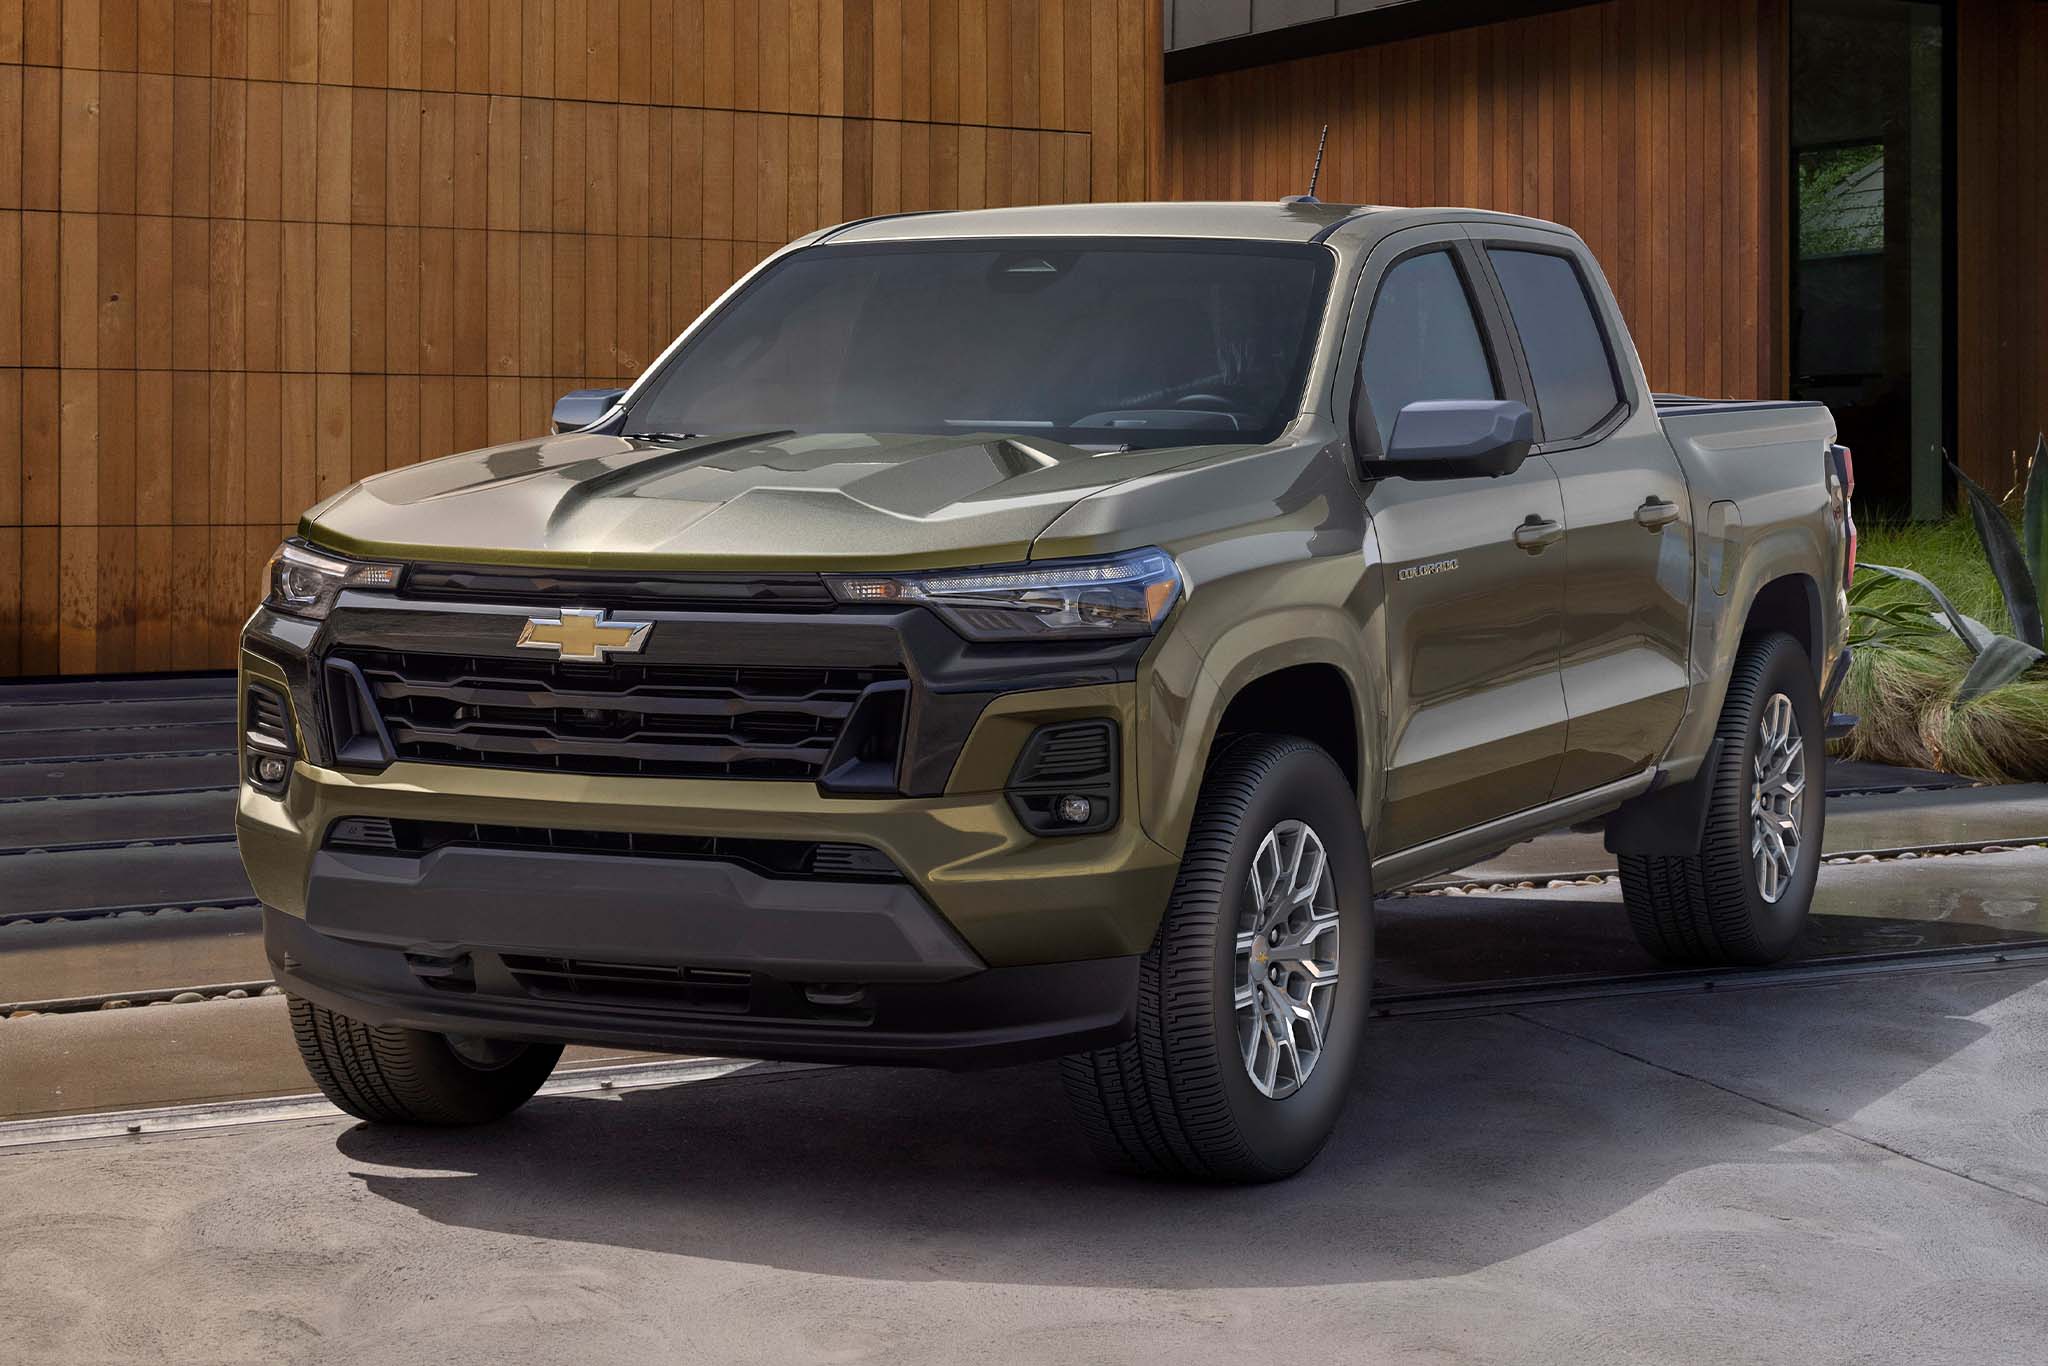 The third generation (2023+) Chevrolet Colorado has been unveiled